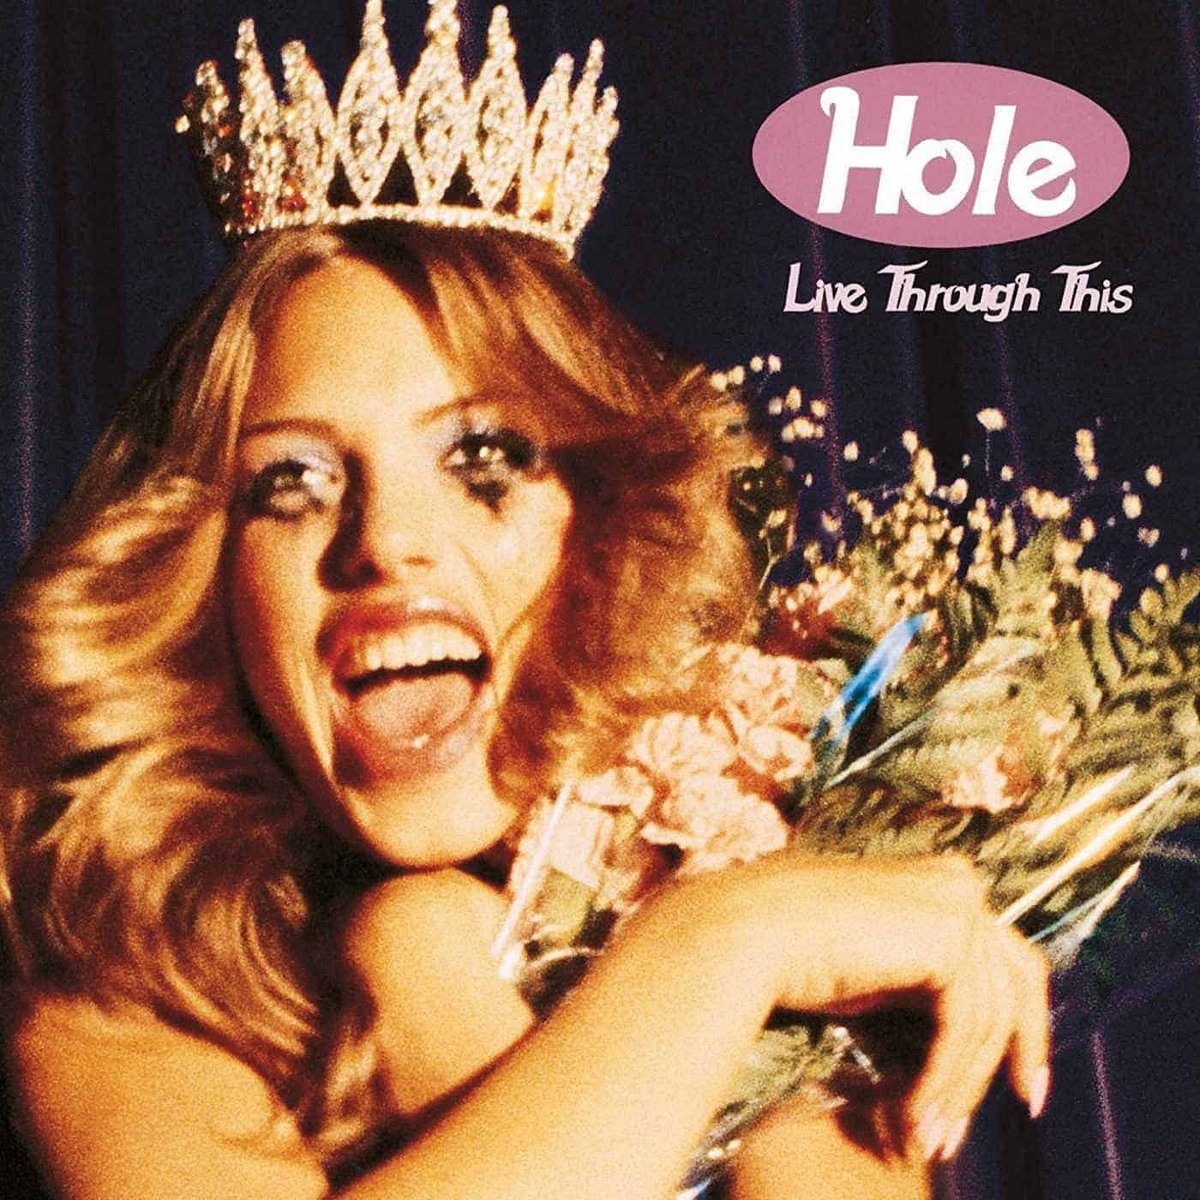 On this day 30 years ago, Hole released their era-defining album, Live Through This. It endures as a document of survival and empowerment. → cos.lv/YYCj50ReYoG